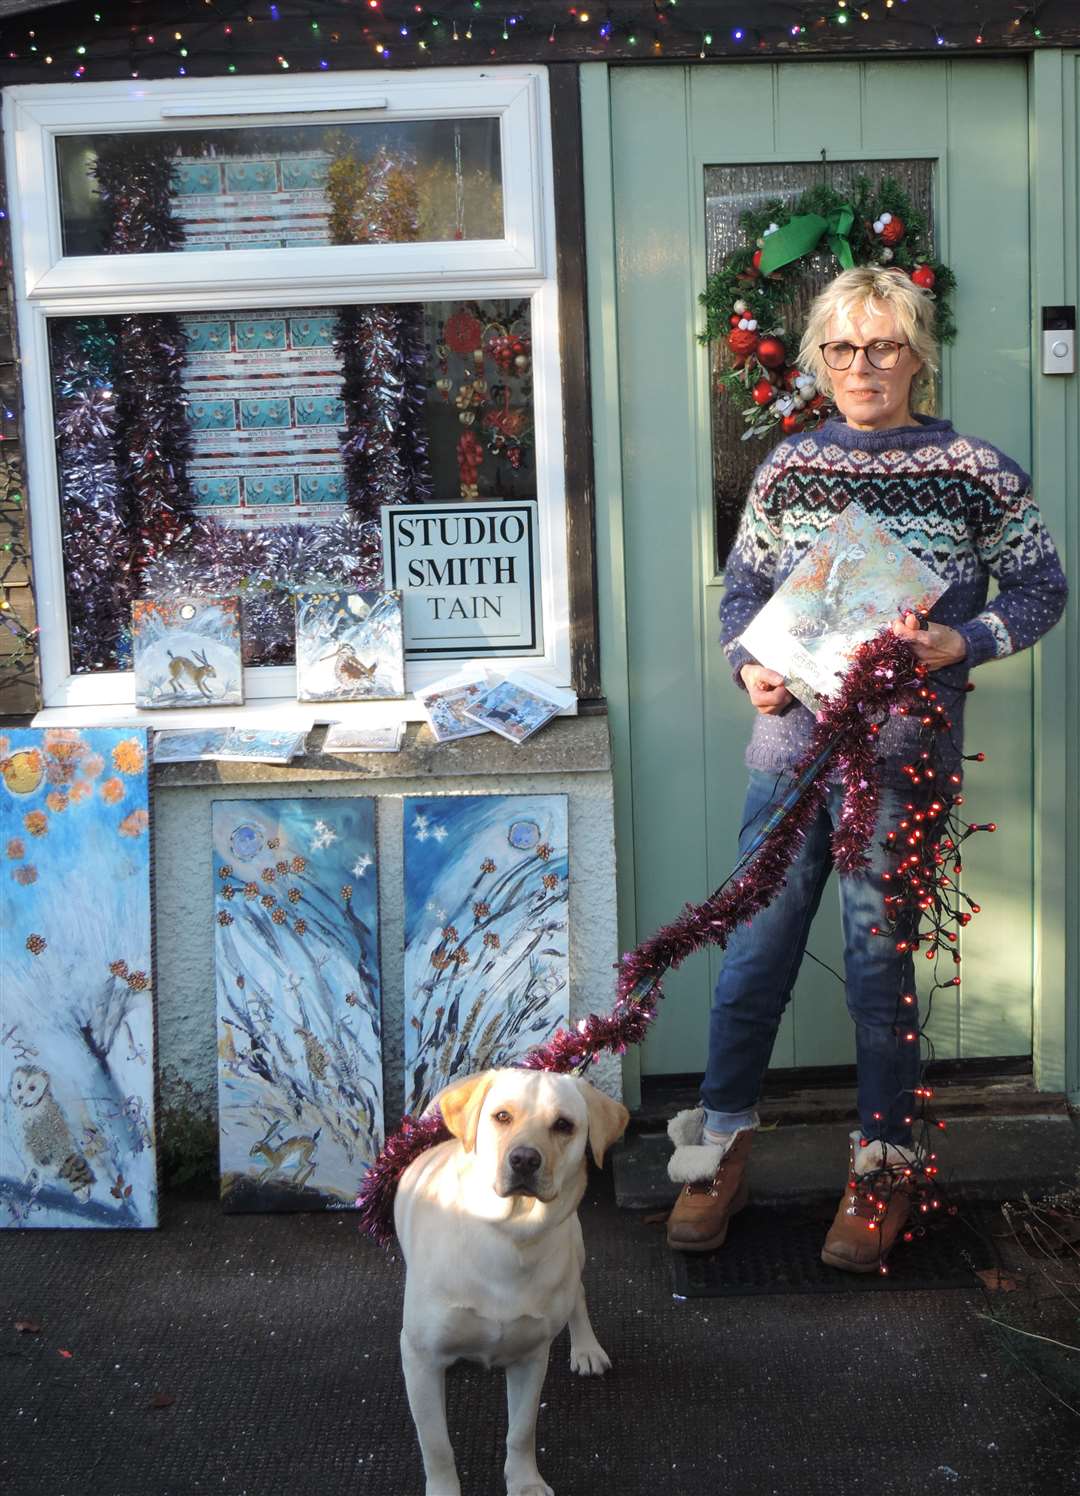 Ingebjorg Smith wearing a Scandi Jumper by Mum Inger Smith with Miss Myrtle, the Tinsel Tangler.